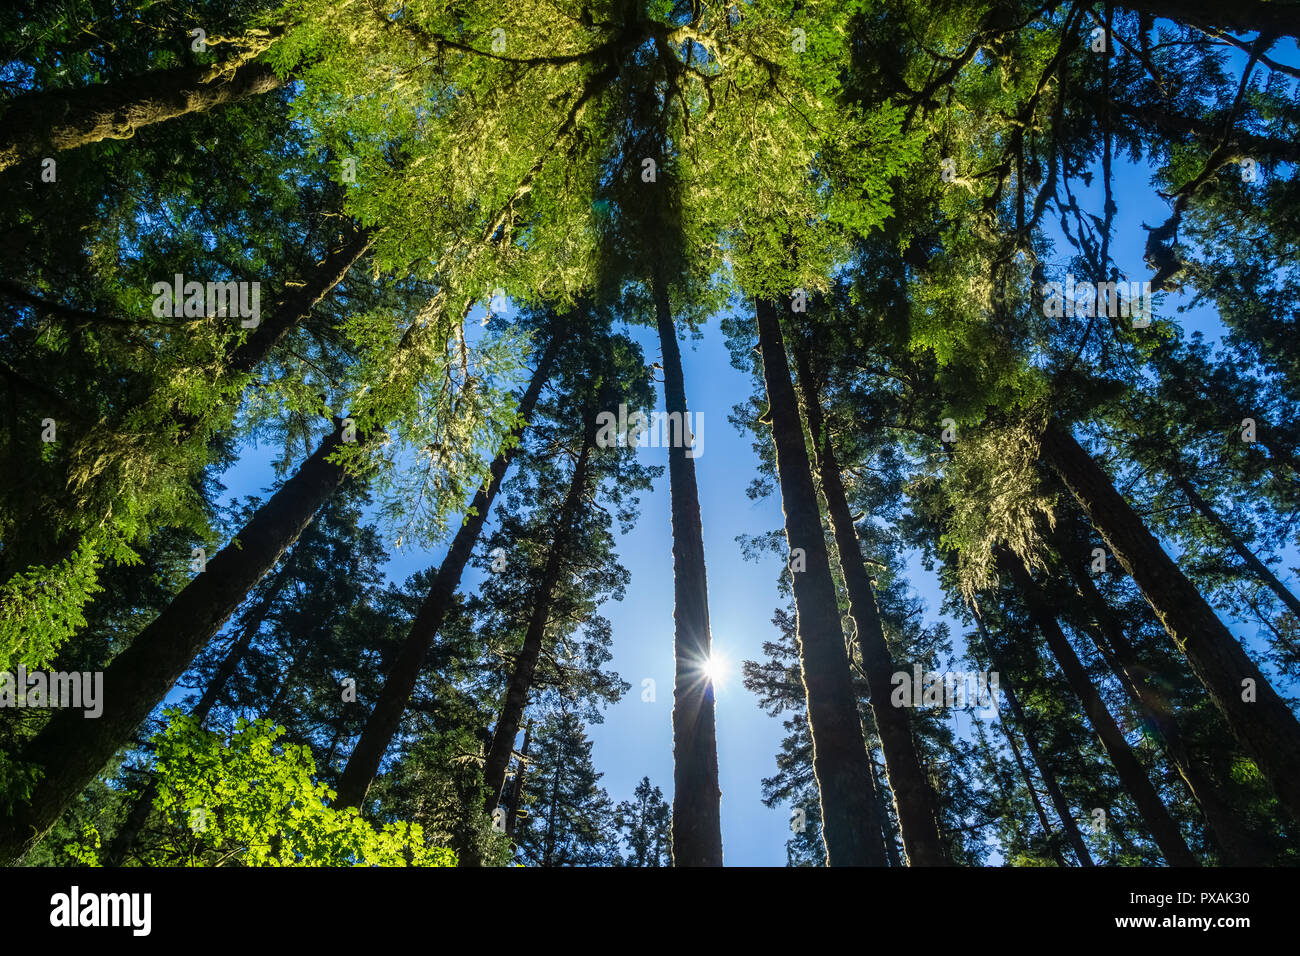 Looking up to towering trees with sun shining through the foliage, Olympic National Forest, Olympic Peninsula, Washington state, USA. Stock Photo